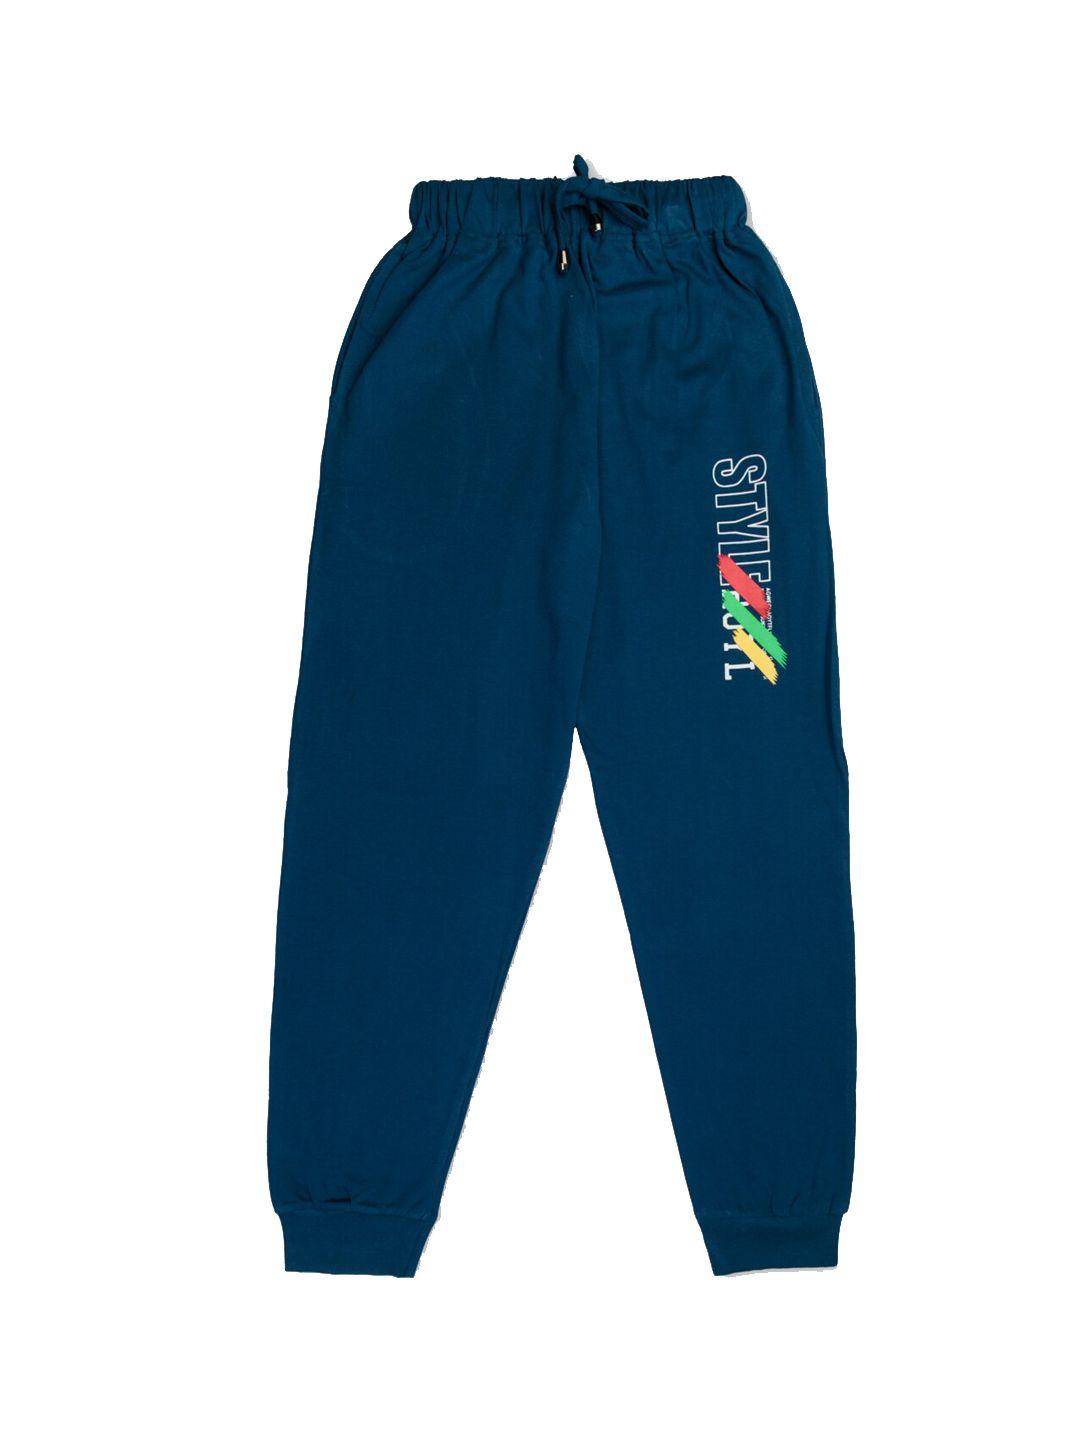 Todd N Teen Boys Blue Solid Cotton Joggers